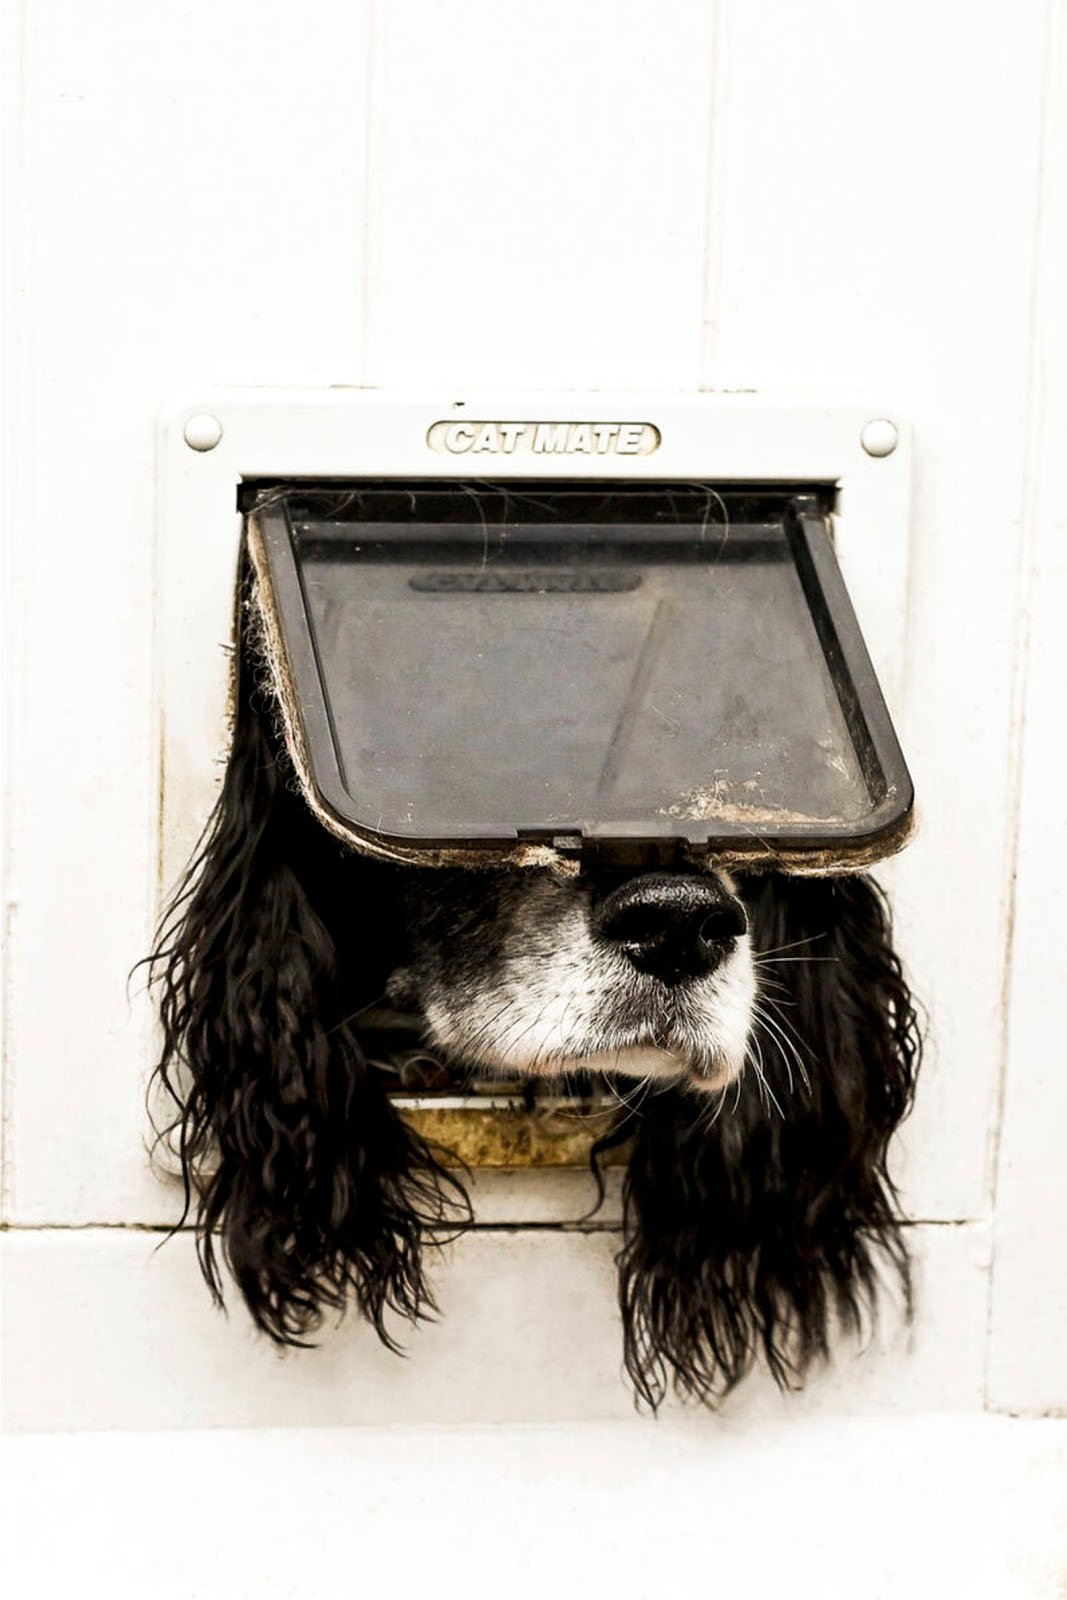 A dog's head peeking through a small white pet door labeled "Cat Mate," humorously contrasting the intended pet use.